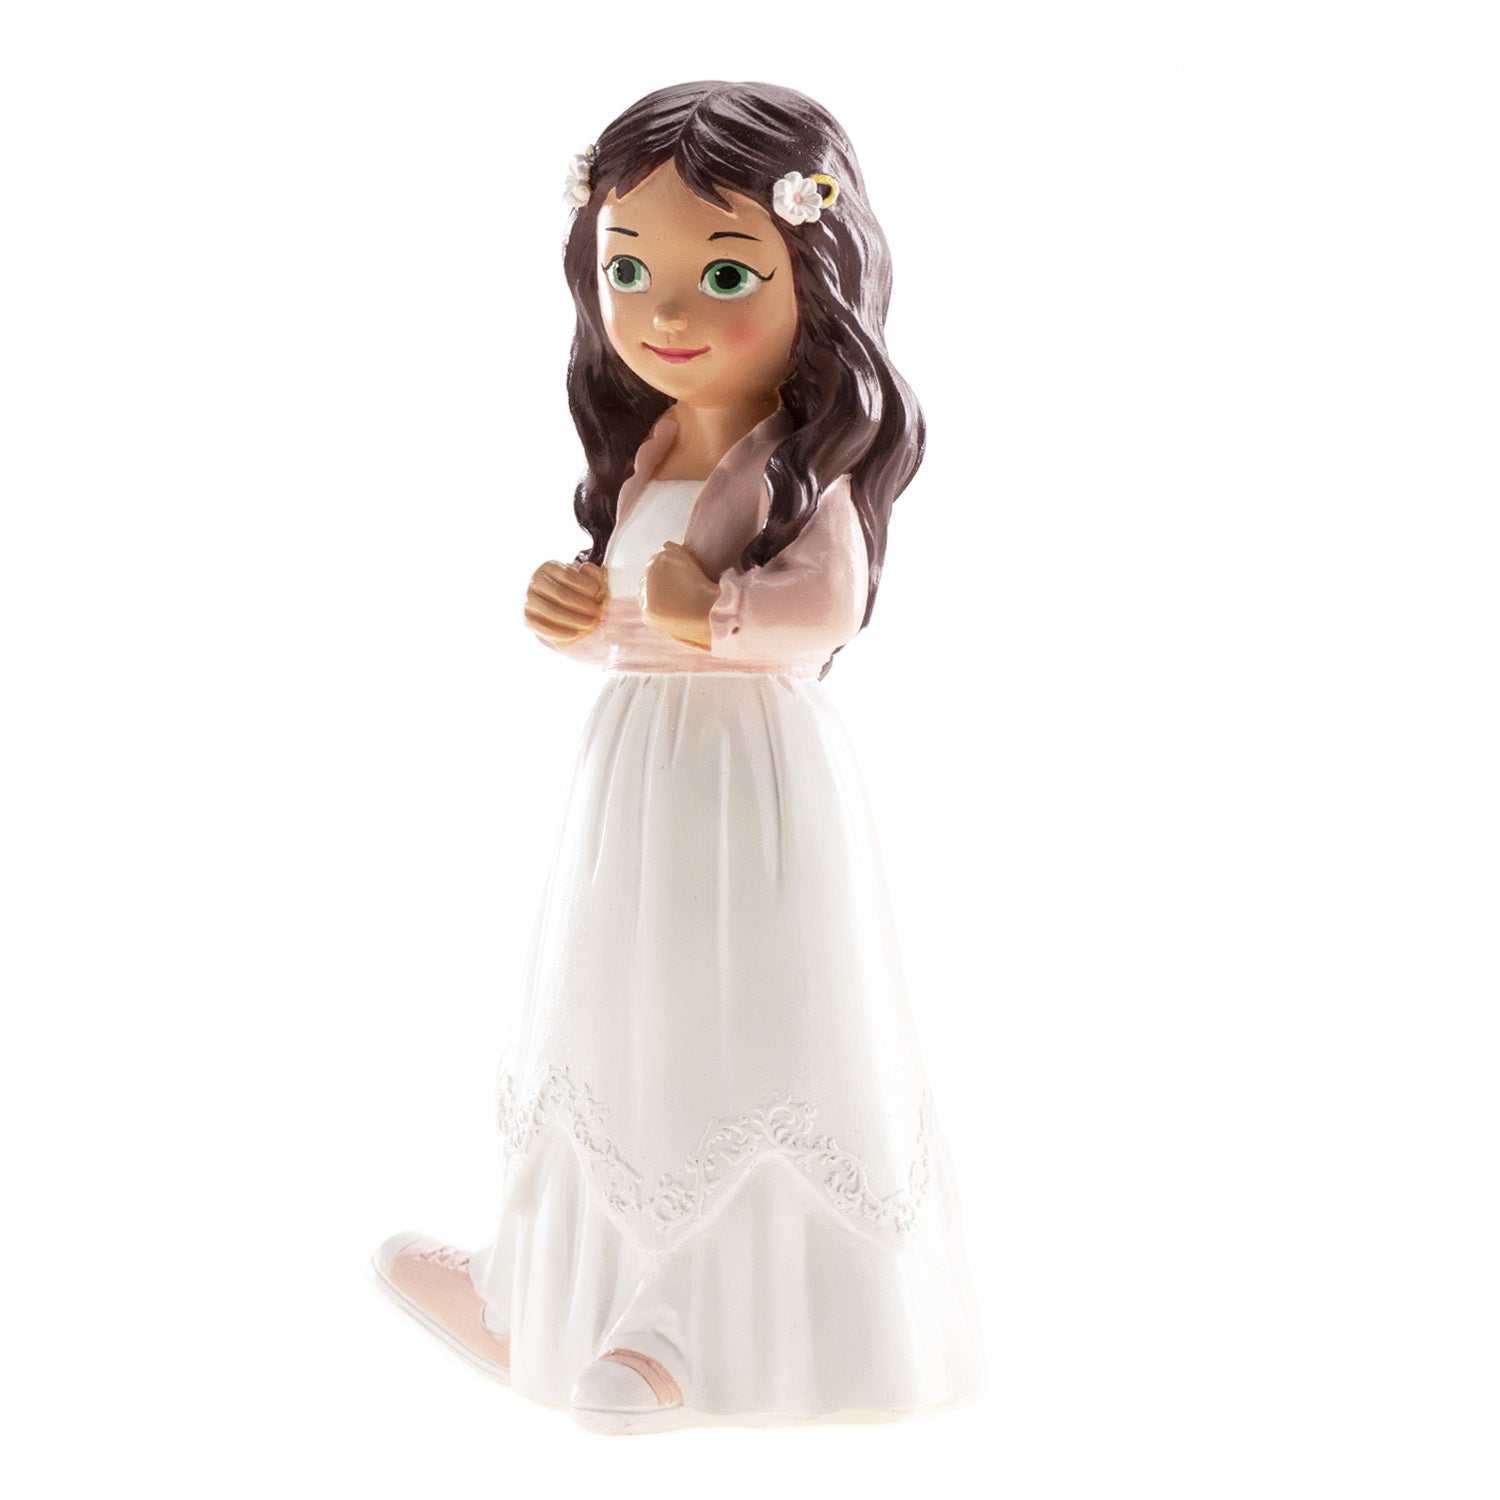 COMMUNION CAKE TOPPER GIRL WITH RUNNERS 15.6CM